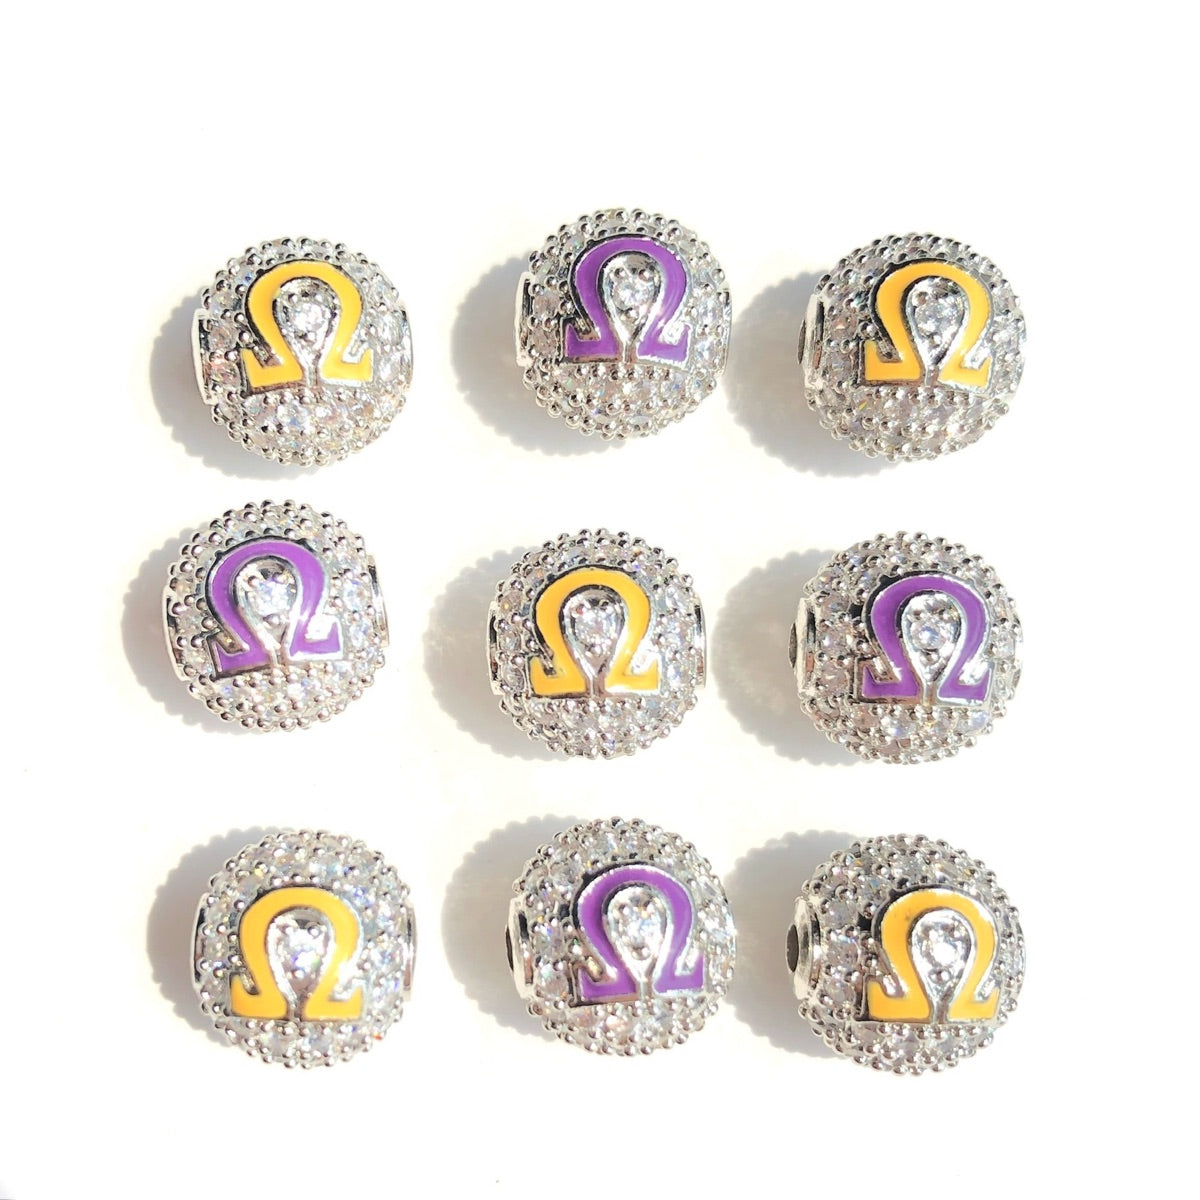 12pcs/lot 10mm Purple Yellow Enamel CZ Paved Greek Letter "Ψ", "Φ", "Ω" Ball Spacers Beads 12 Silver Ω CZ Paved Spacers 10mm Beads Ball Beads Greek Letters New Spacers Arrivals Charms Beads Beyond